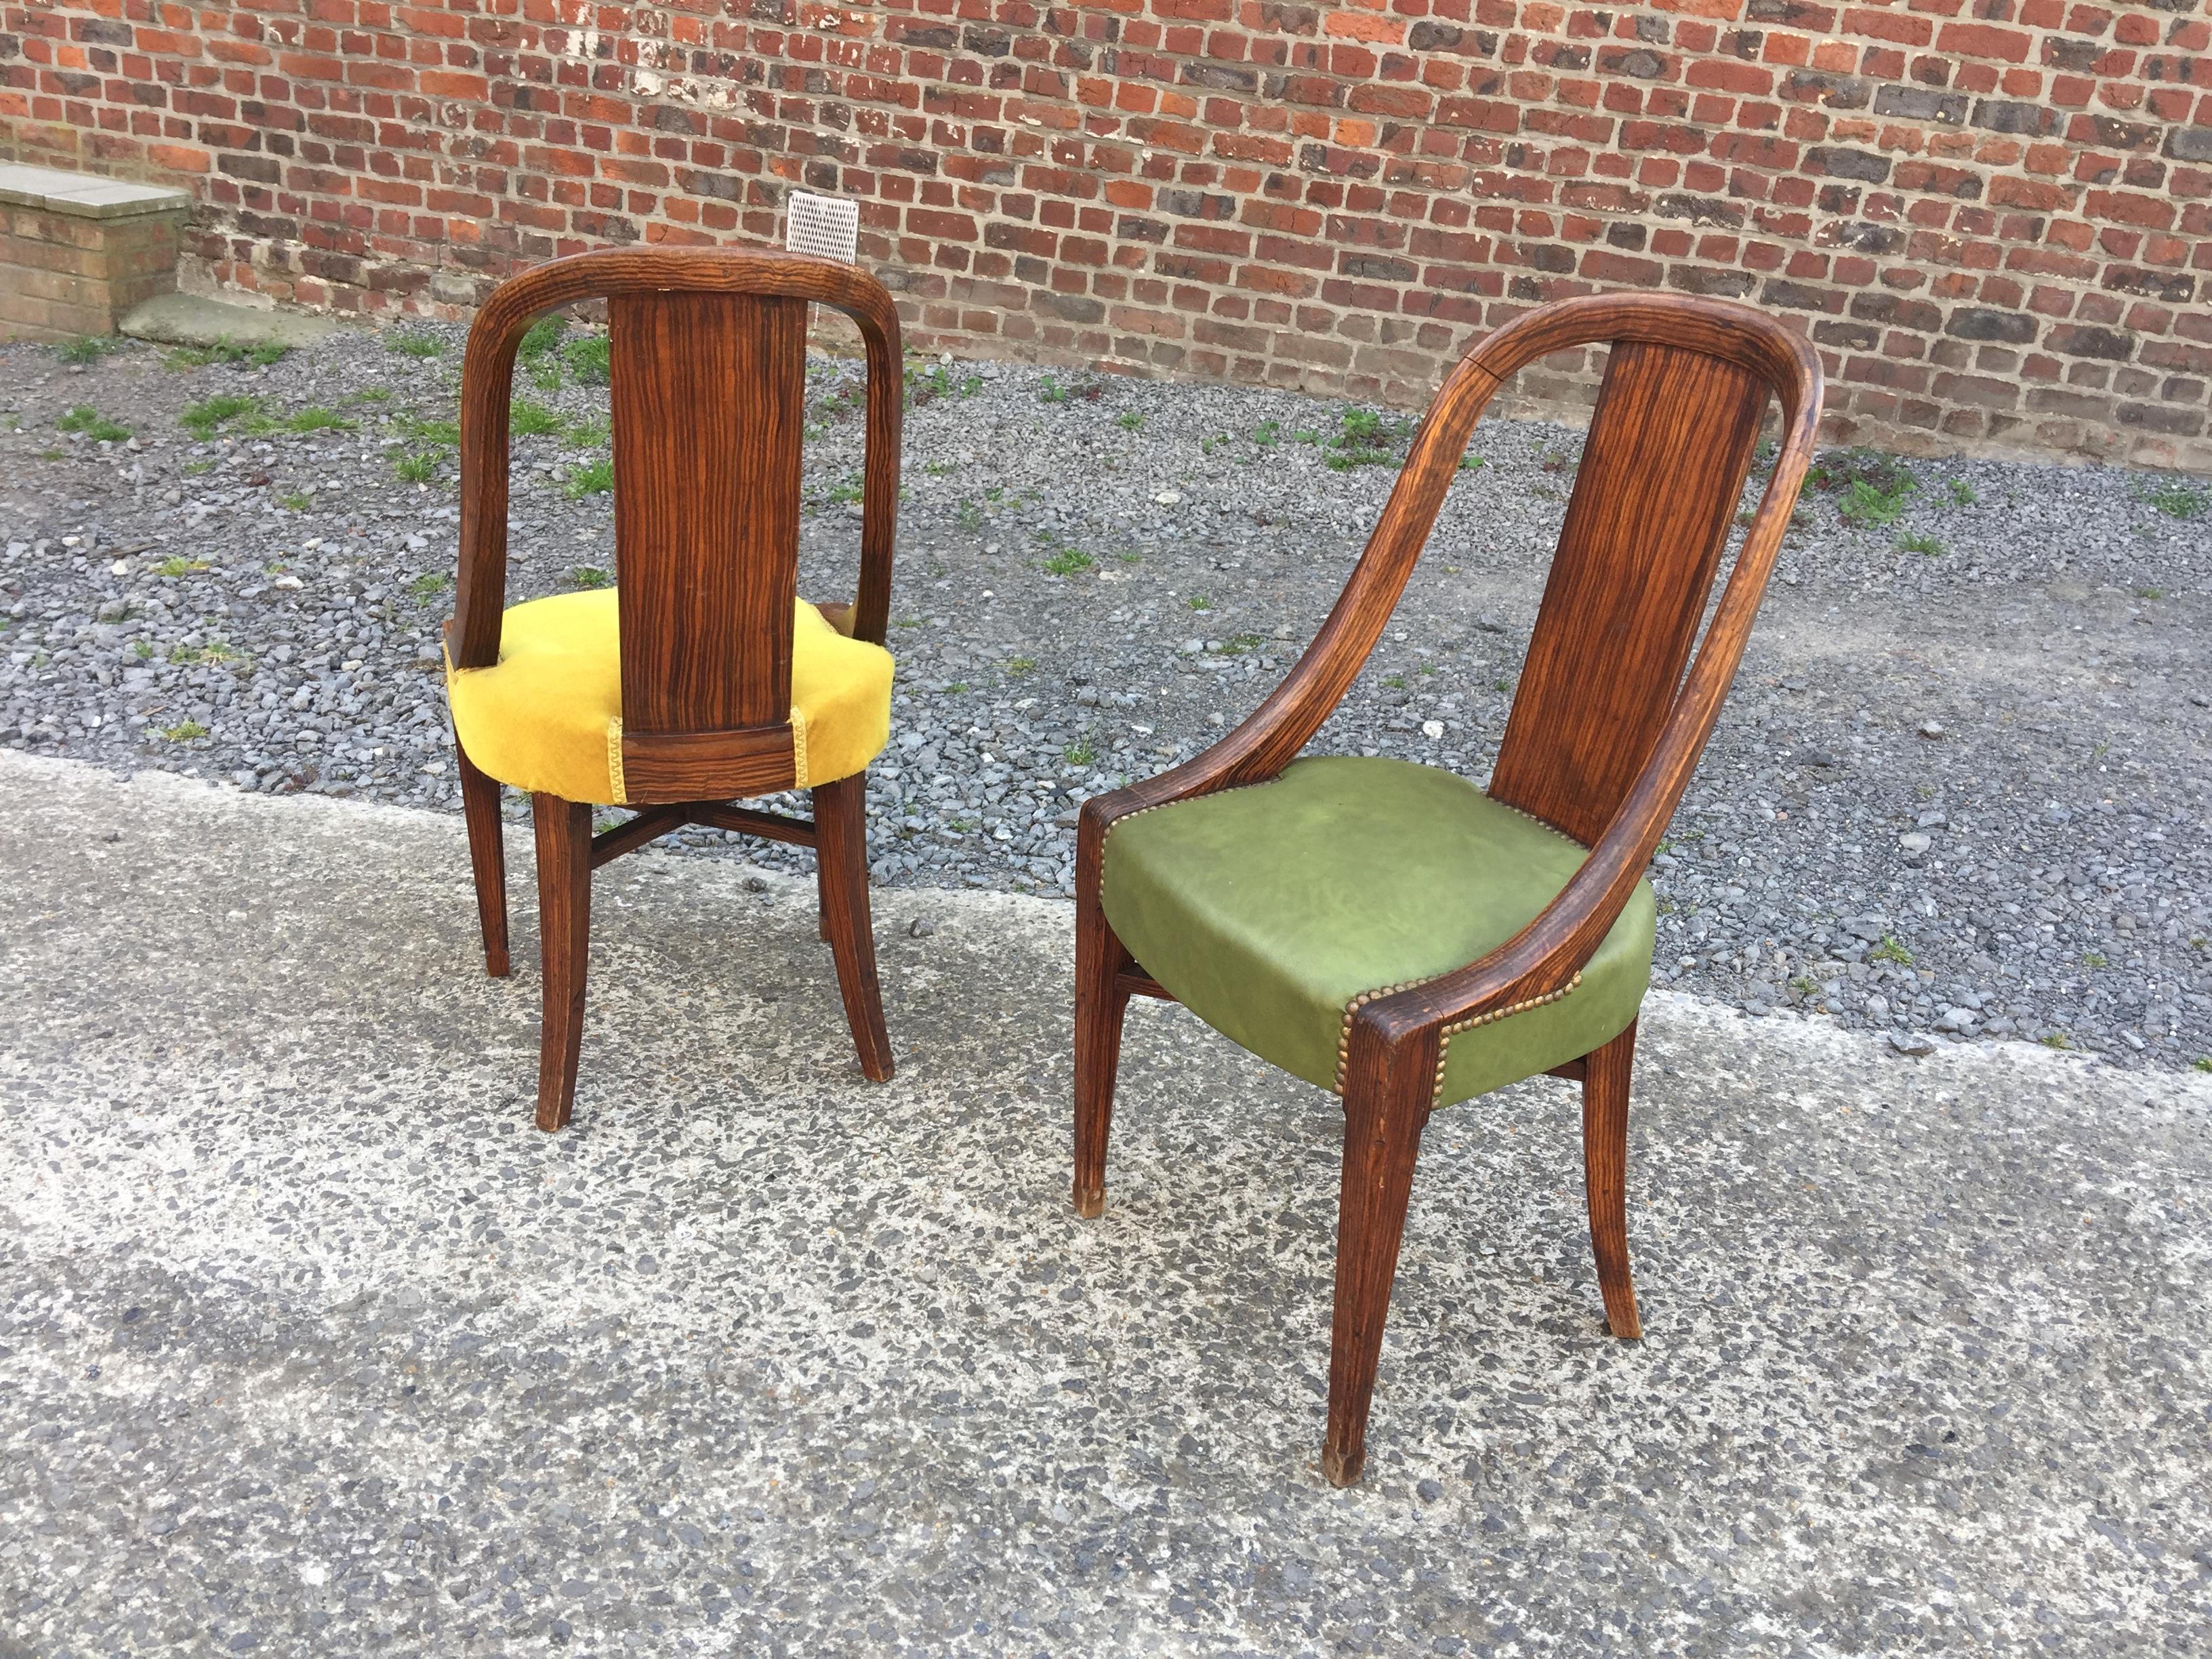 Three Art Deco chairs, in wood painted faux wood decor, circa 1925.